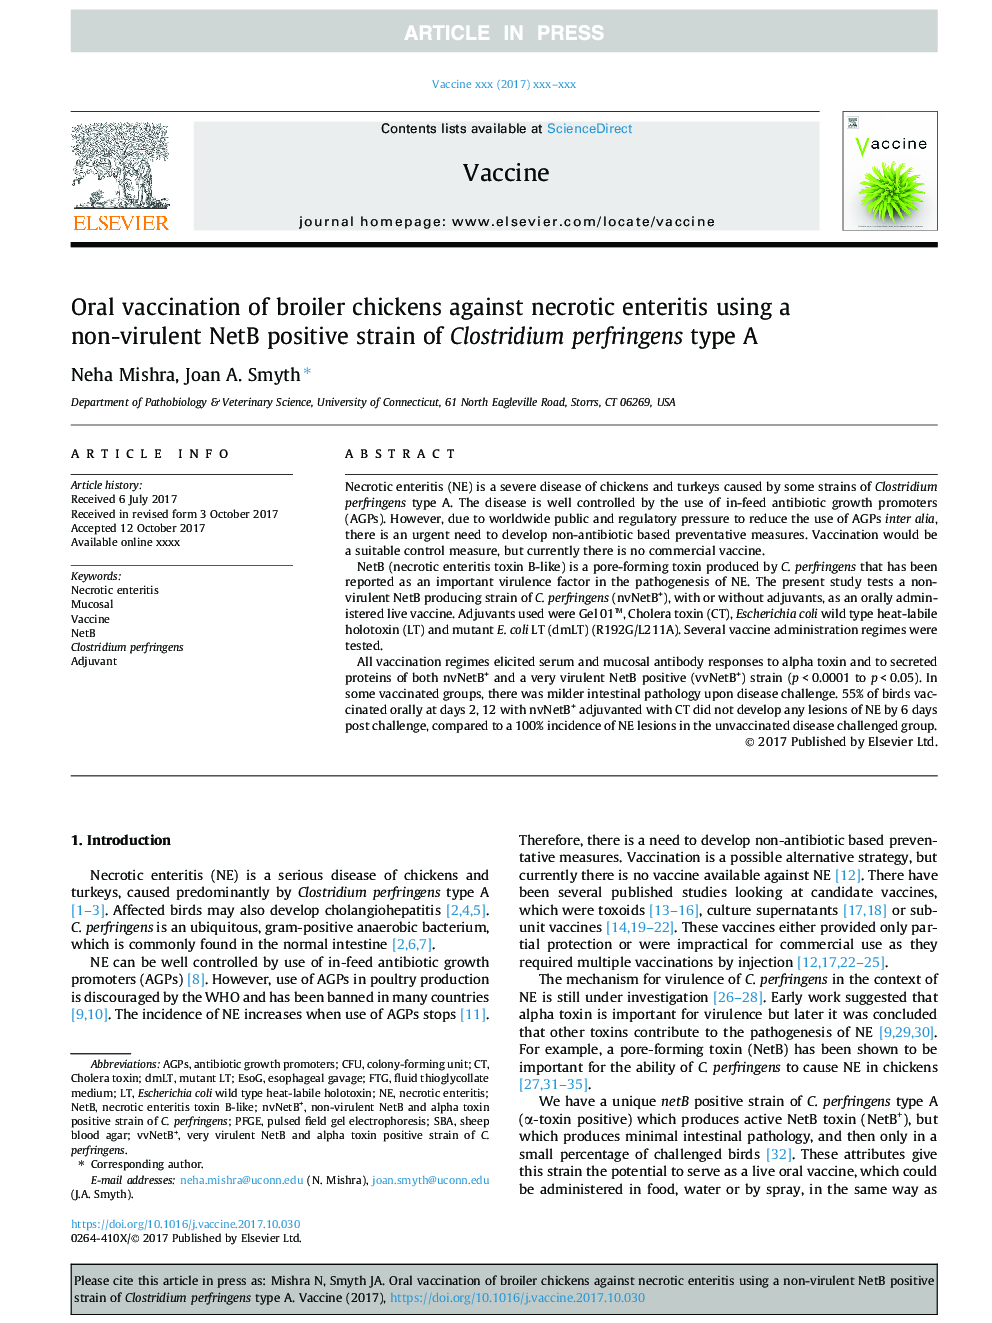 Oral vaccination of broiler chickens against necrotic enteritis using a non-virulent NetB positive strain of Clostridium perfringens type A